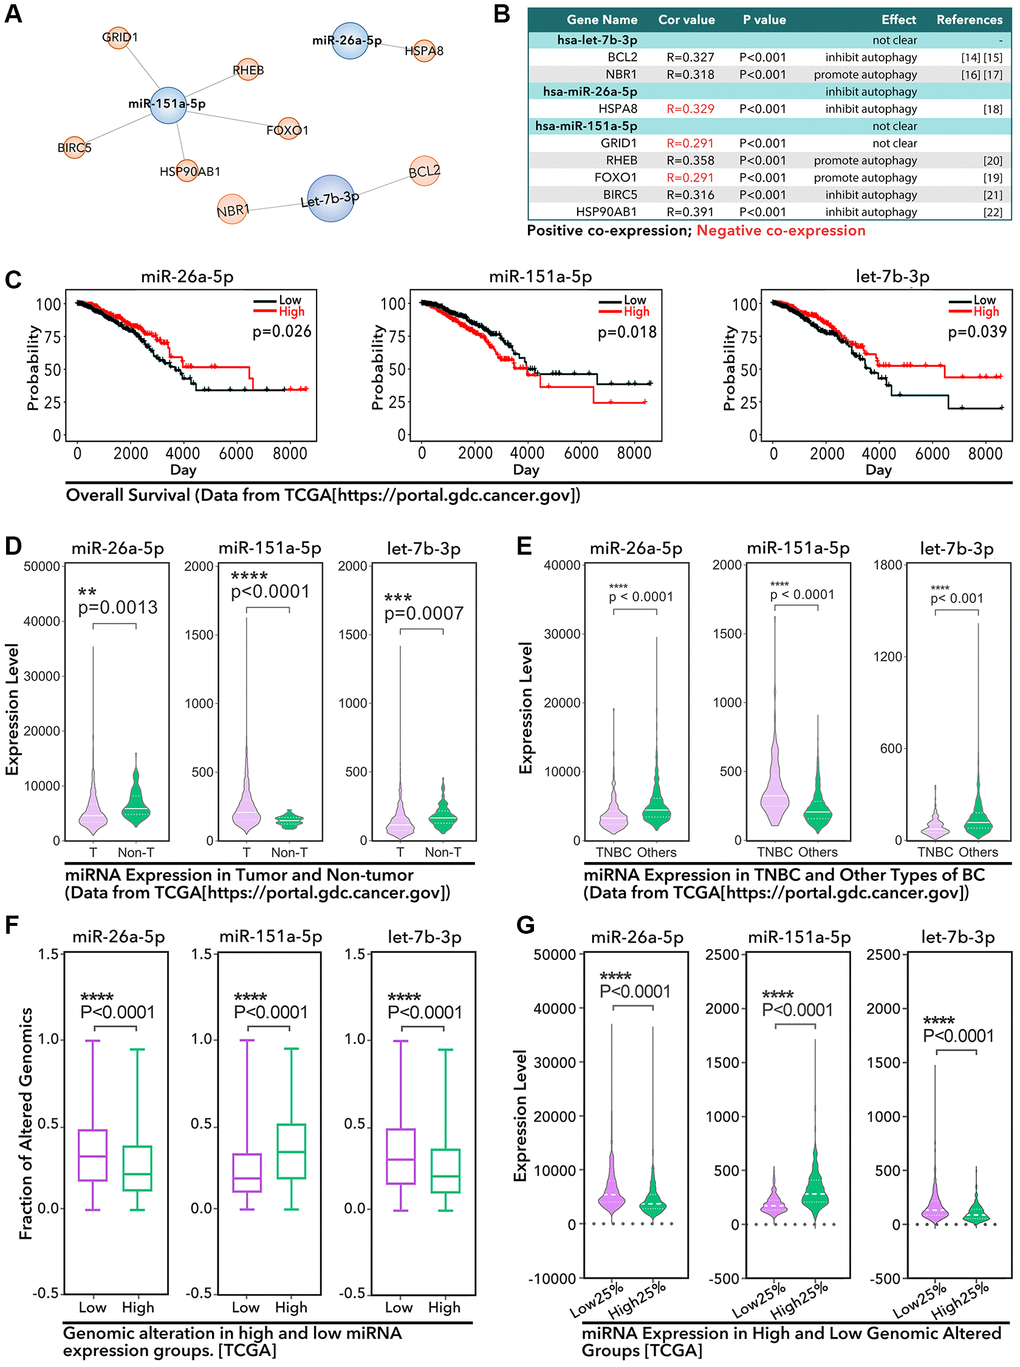 The identified 3 miRNAs in breast cancer. (A) Three autophagy-related miRNAs are identified, among which (B) let-7b-3p is positive co-expression with BCL2 and NBR1, miR-26a-5p is negative co-expression with HSPA8, miR-151a-5p is positive co-expression with RHEB, BIRC5, and HSP90AB1, and negative co-expression with GRID1 and FOXO1. (C) The prognosis characteristics of three miRNAs from TCGA by K-M analysis. (D) The expression of 3 miRNAs in breast cancer tissues and adjacent tissues. (E) The expression of 3 miRNAs in TNBC tissues and other types of breast cancer tissues. (F and G) The relationship between the expression profile of 3 miRNAs and the genomic altered faction status.